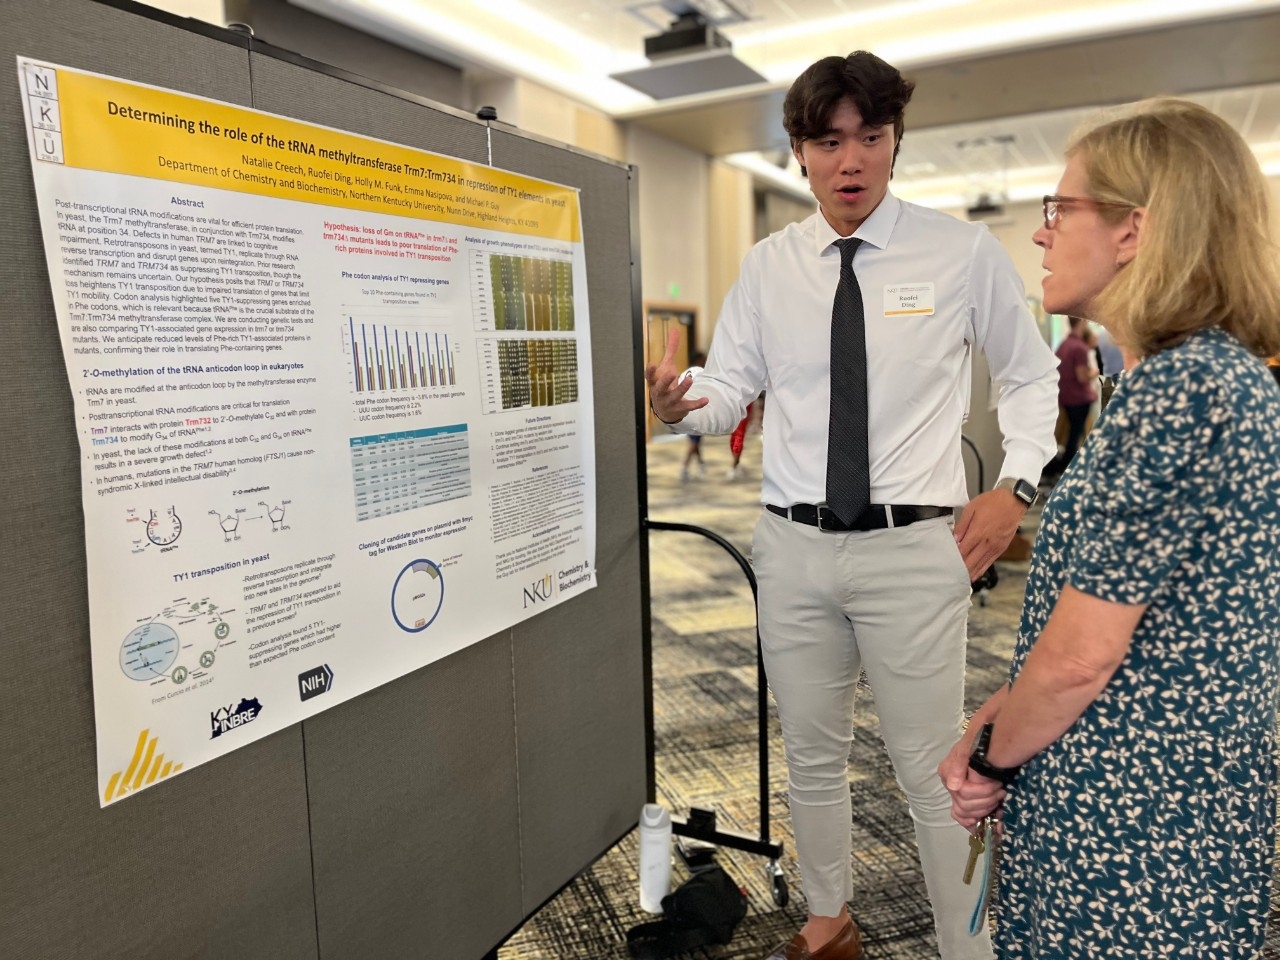 NKU student presents research poster to a faculty member